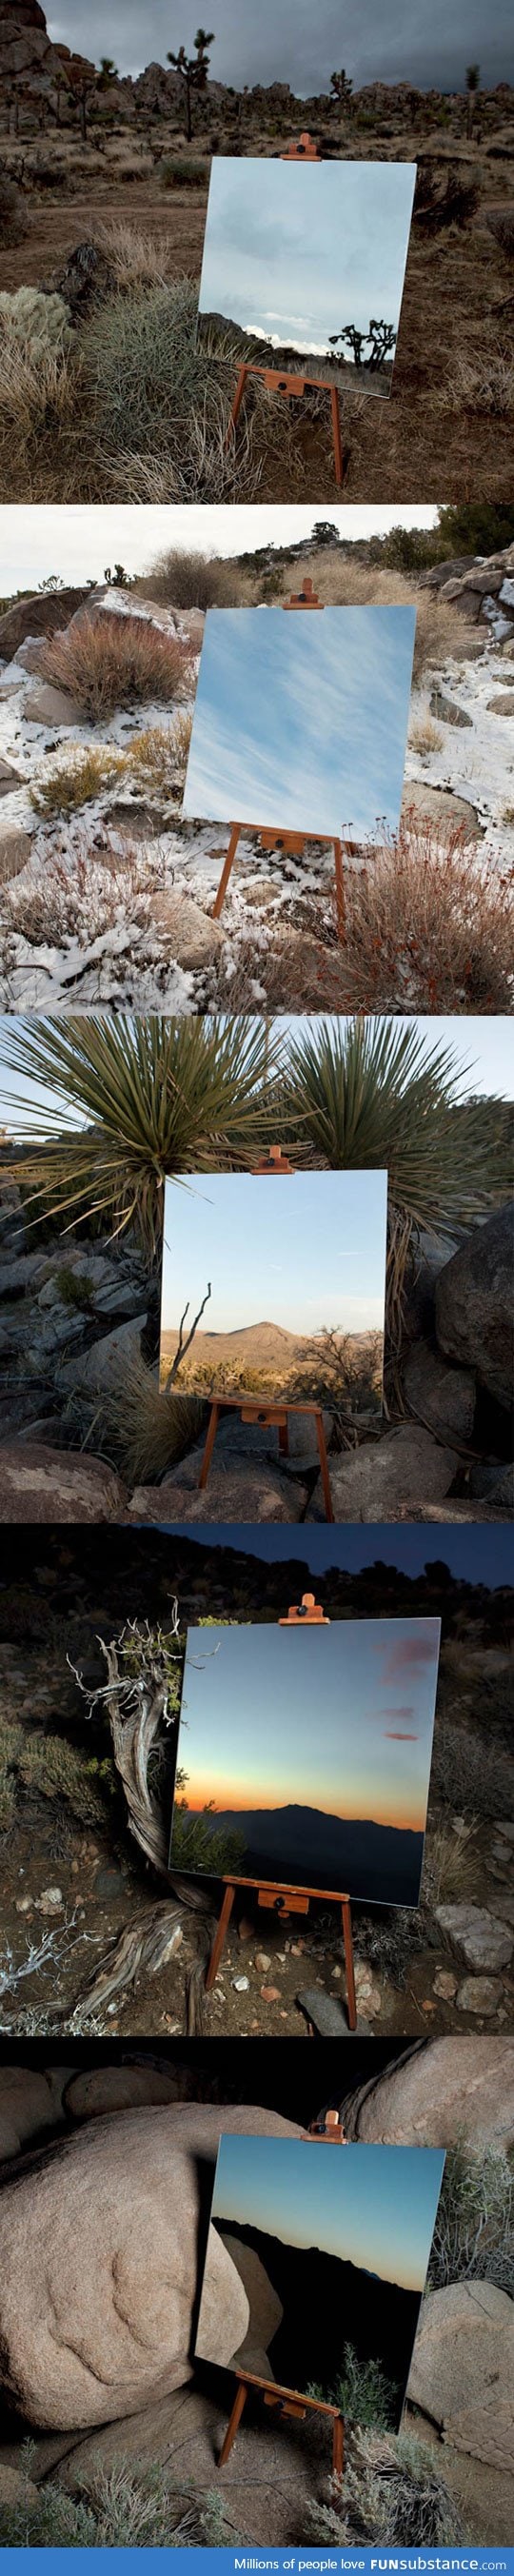 Photos of mirrors in the desert